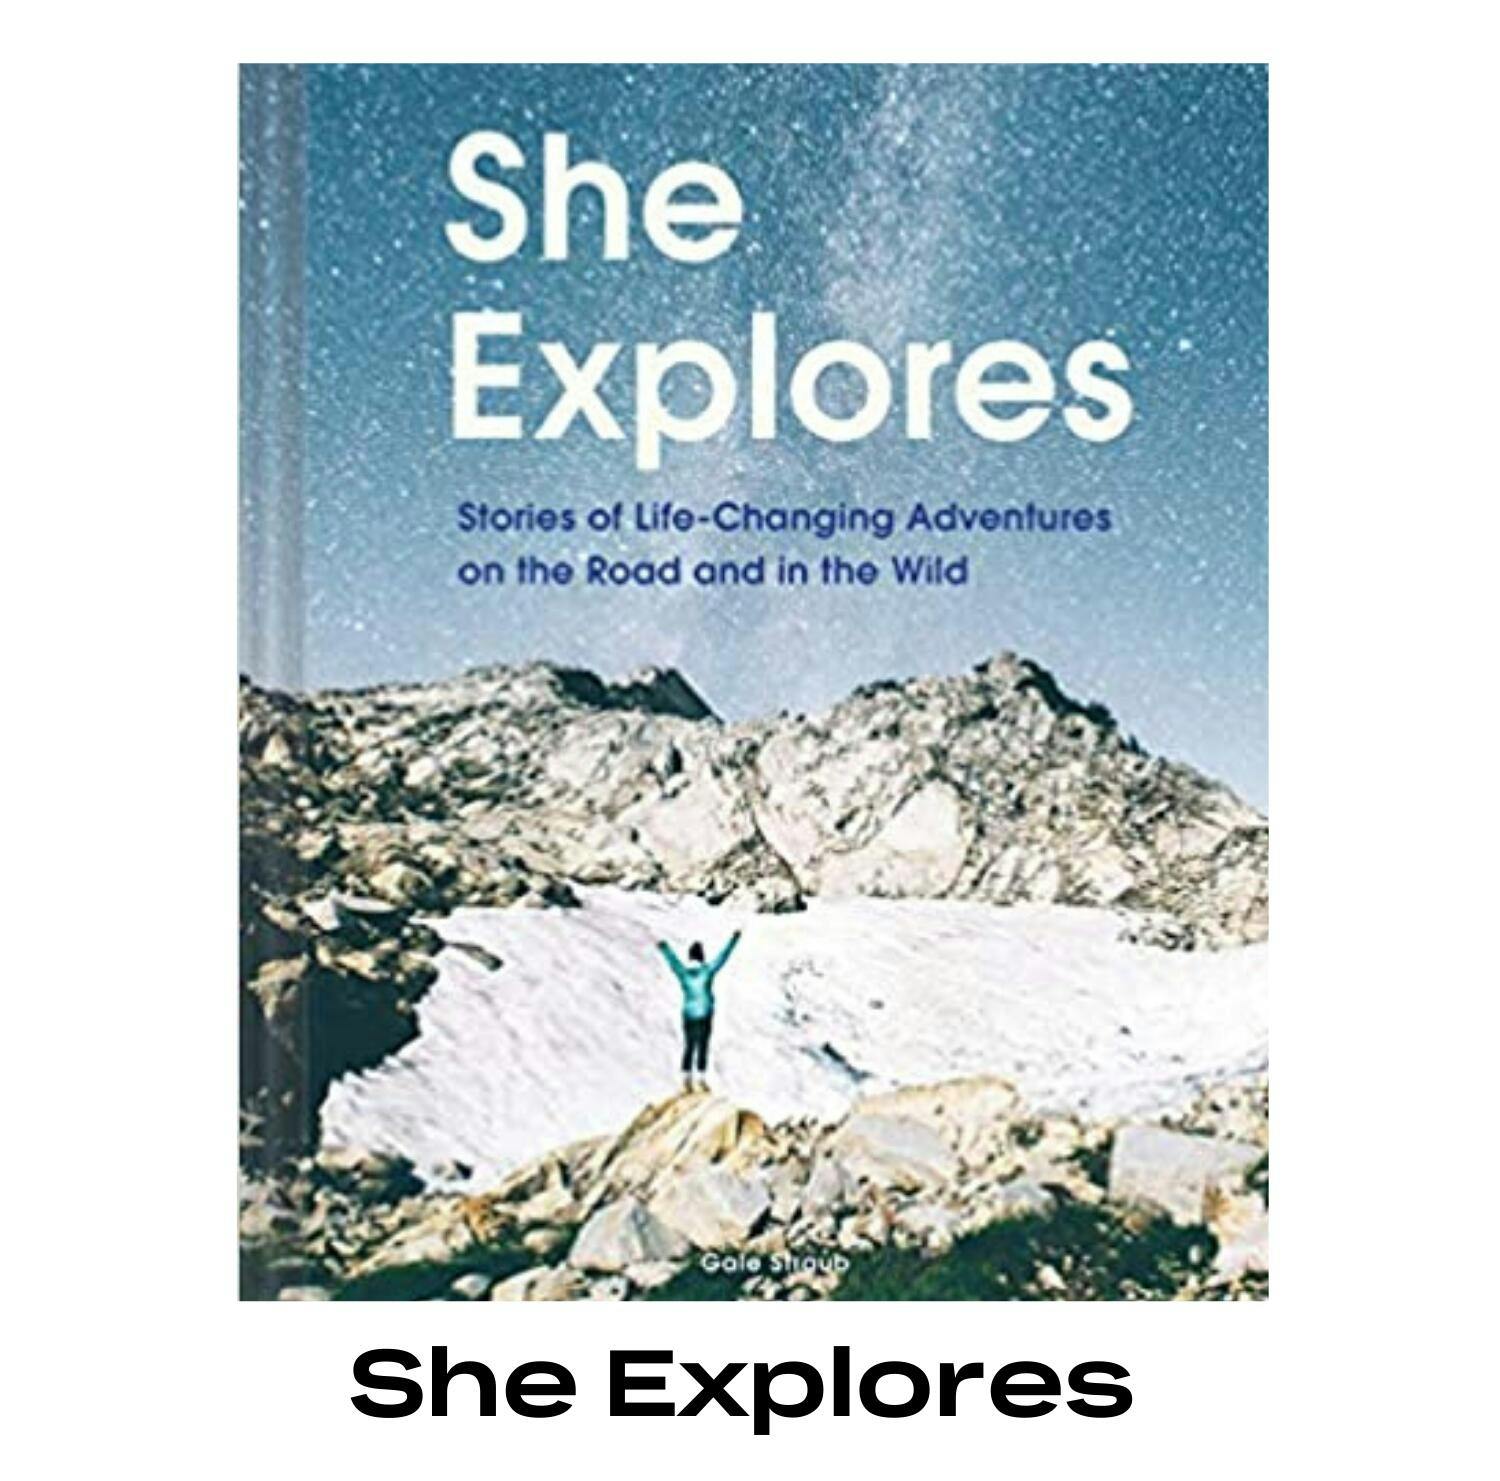 The cover of the "She Explores" book depicts a woman standing on top of a rock with her arms in the air in celebration.